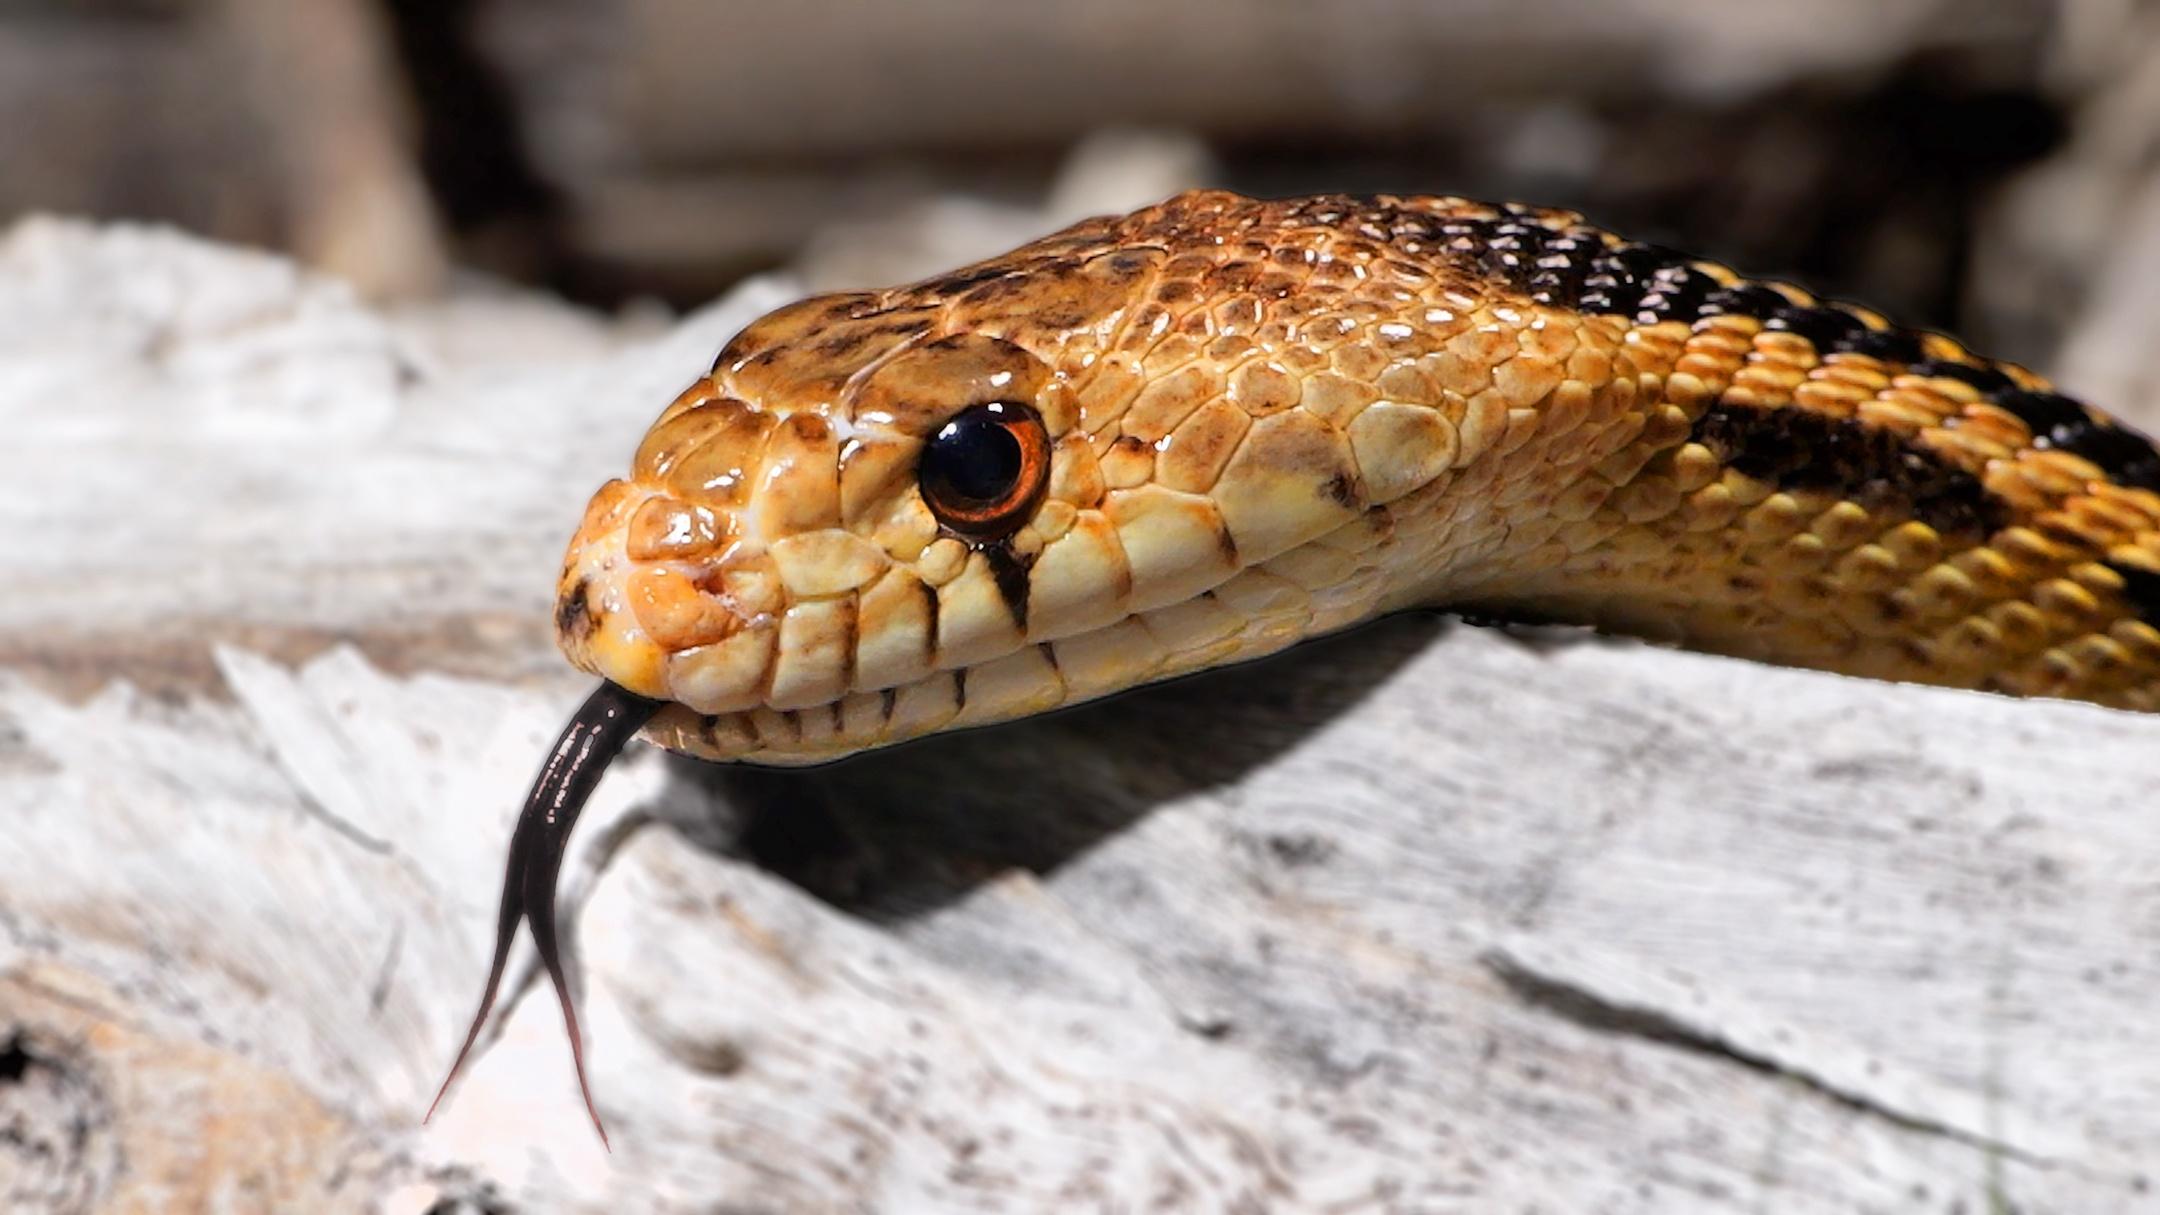 Deep Look, Why Do Snakes Have Forked Tongues?, Season 10, Episode 6